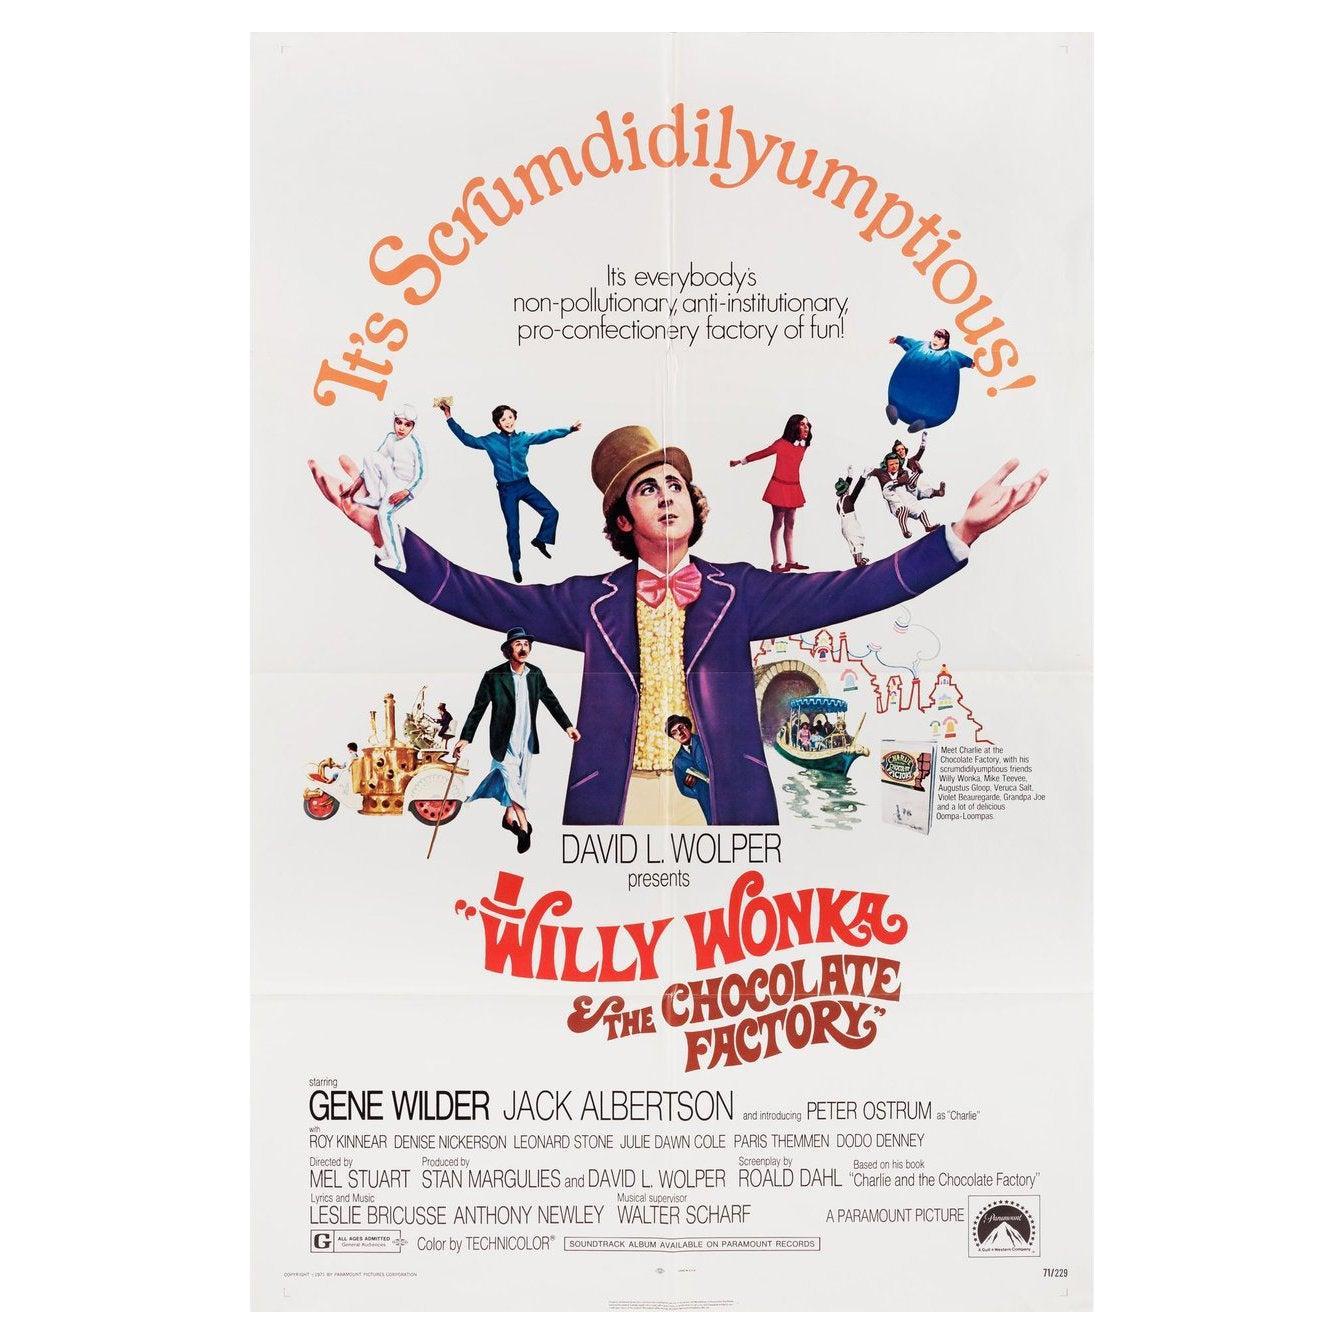 Affiche du film américain One Sheet, Willy Wonka & the Chocolate Factory, 1971